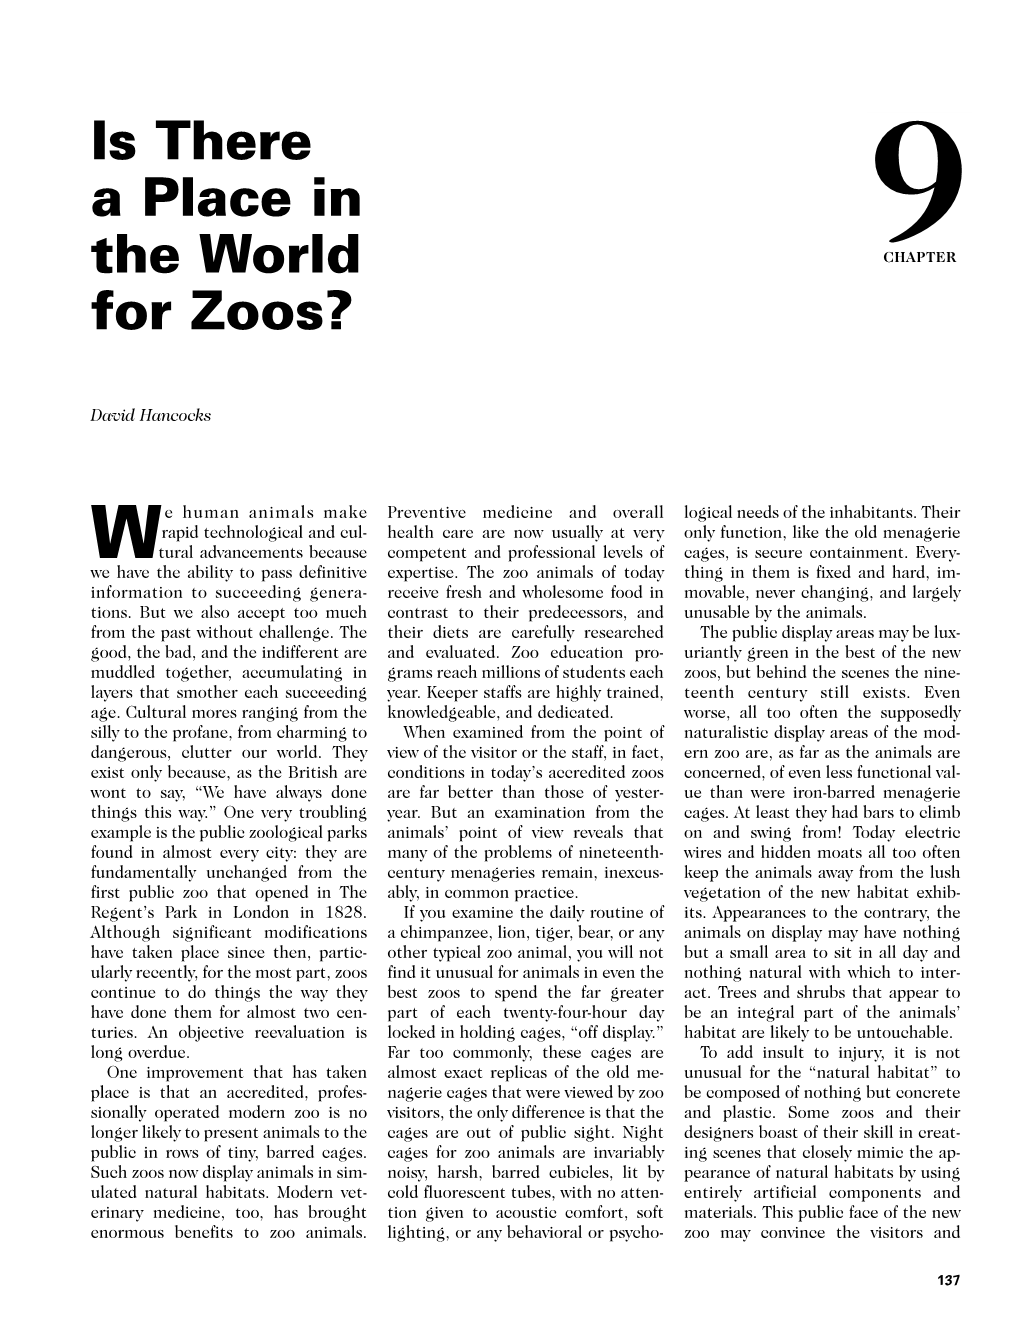 Is There a Place in the World for Zoos? 139 Sometimes Elaborate Psychological Tween the Standard Zoo Enclosures of One Day to Another